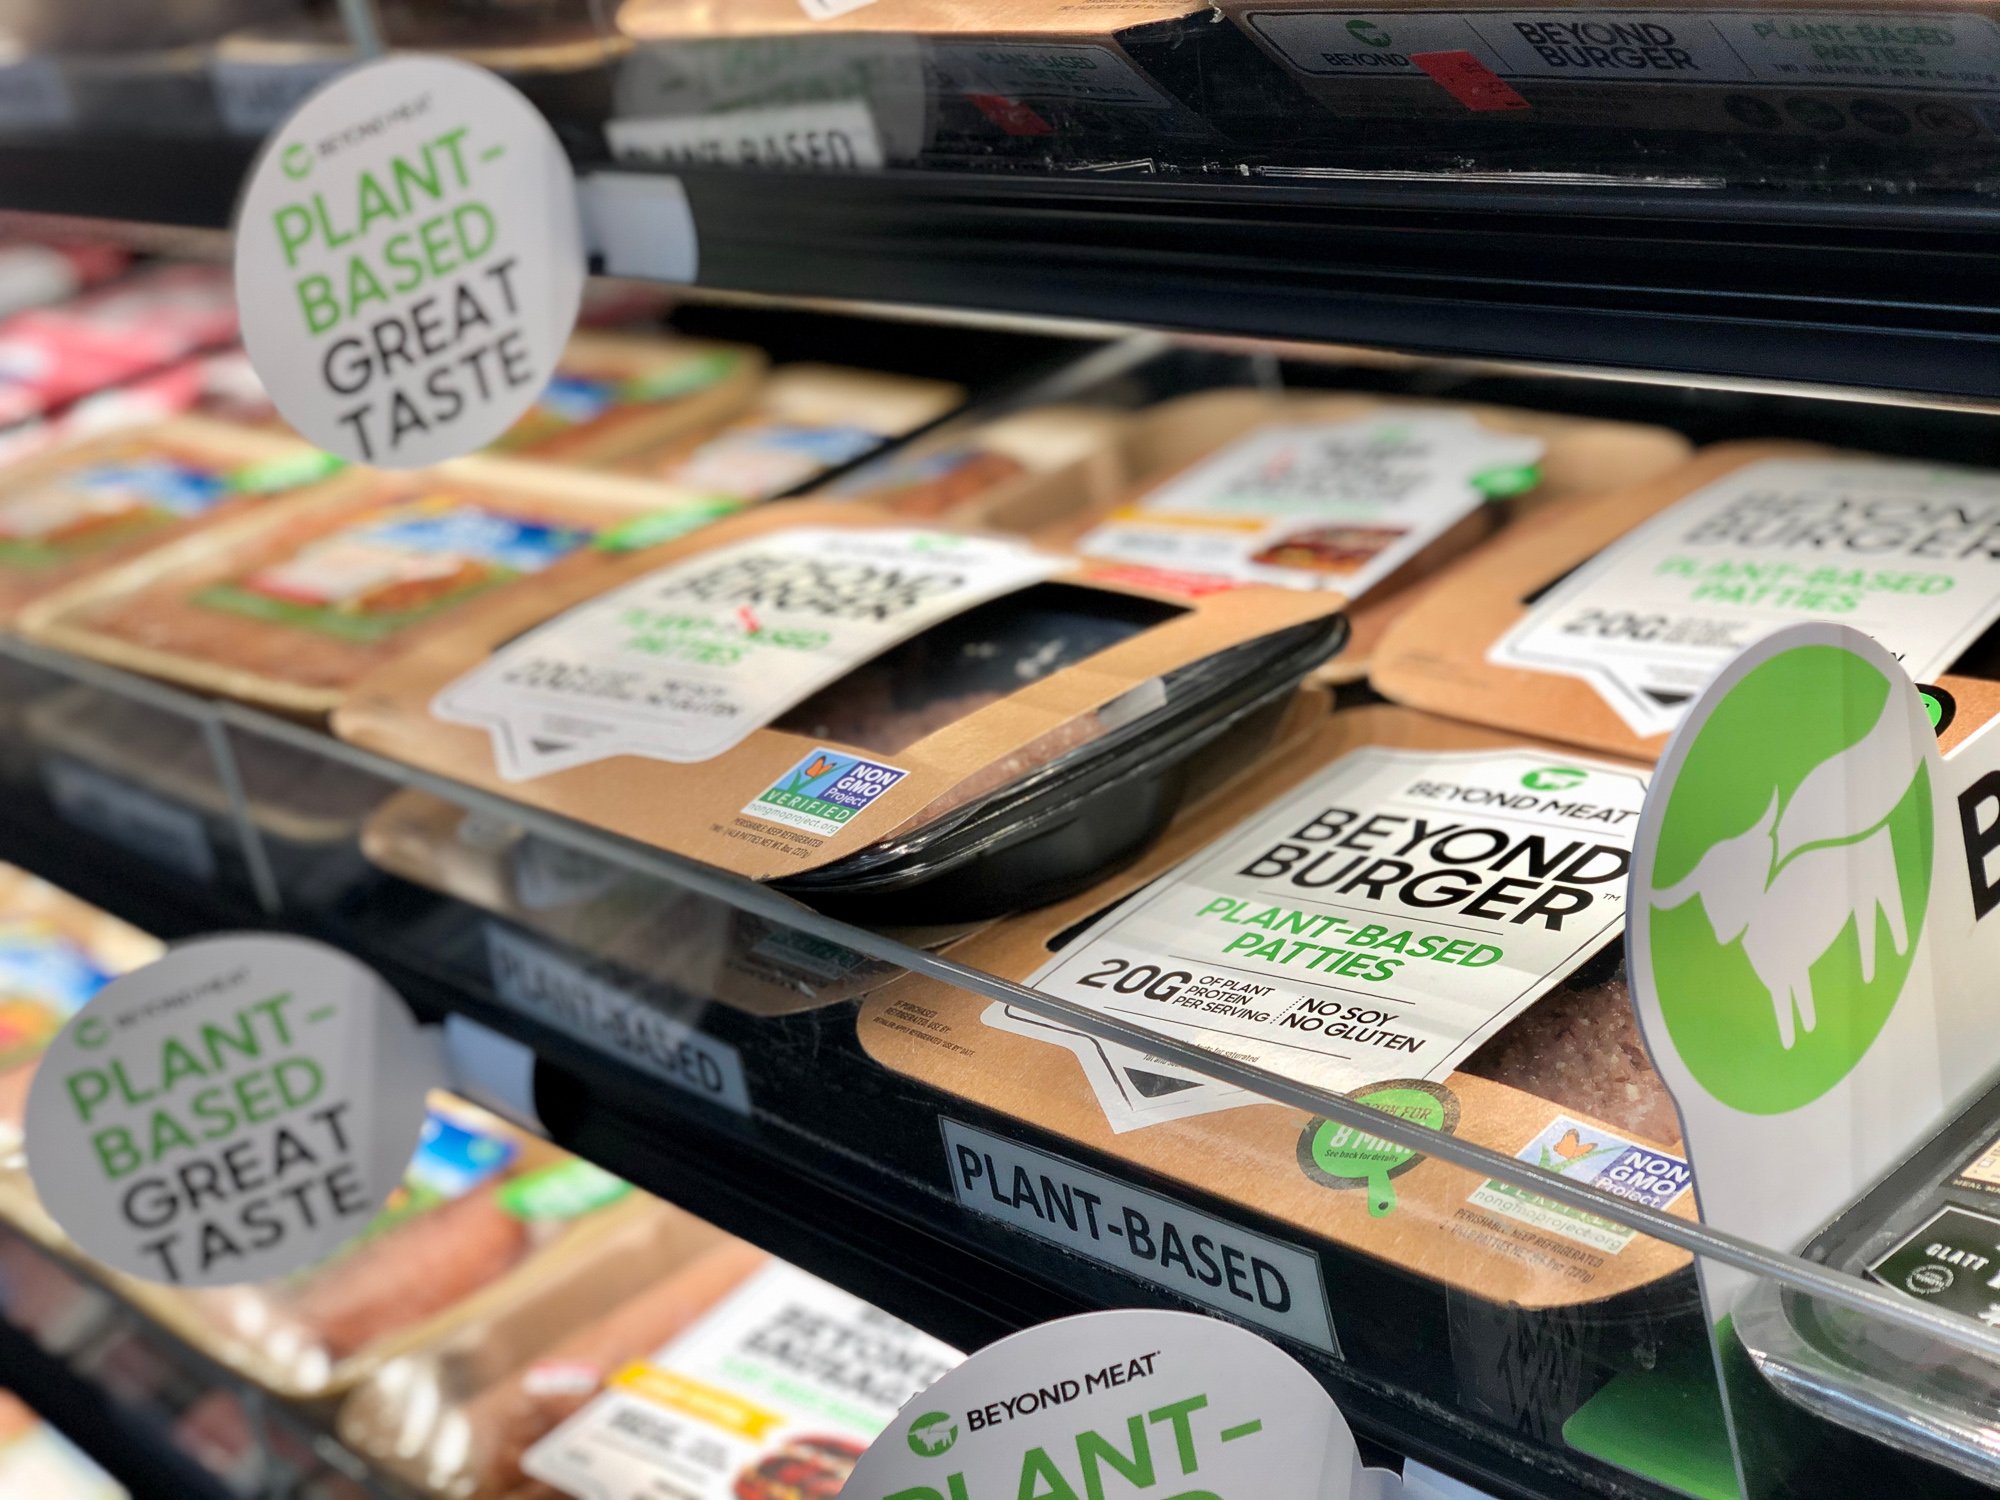 Beyond meat burgers merchandised in the refrigerated section